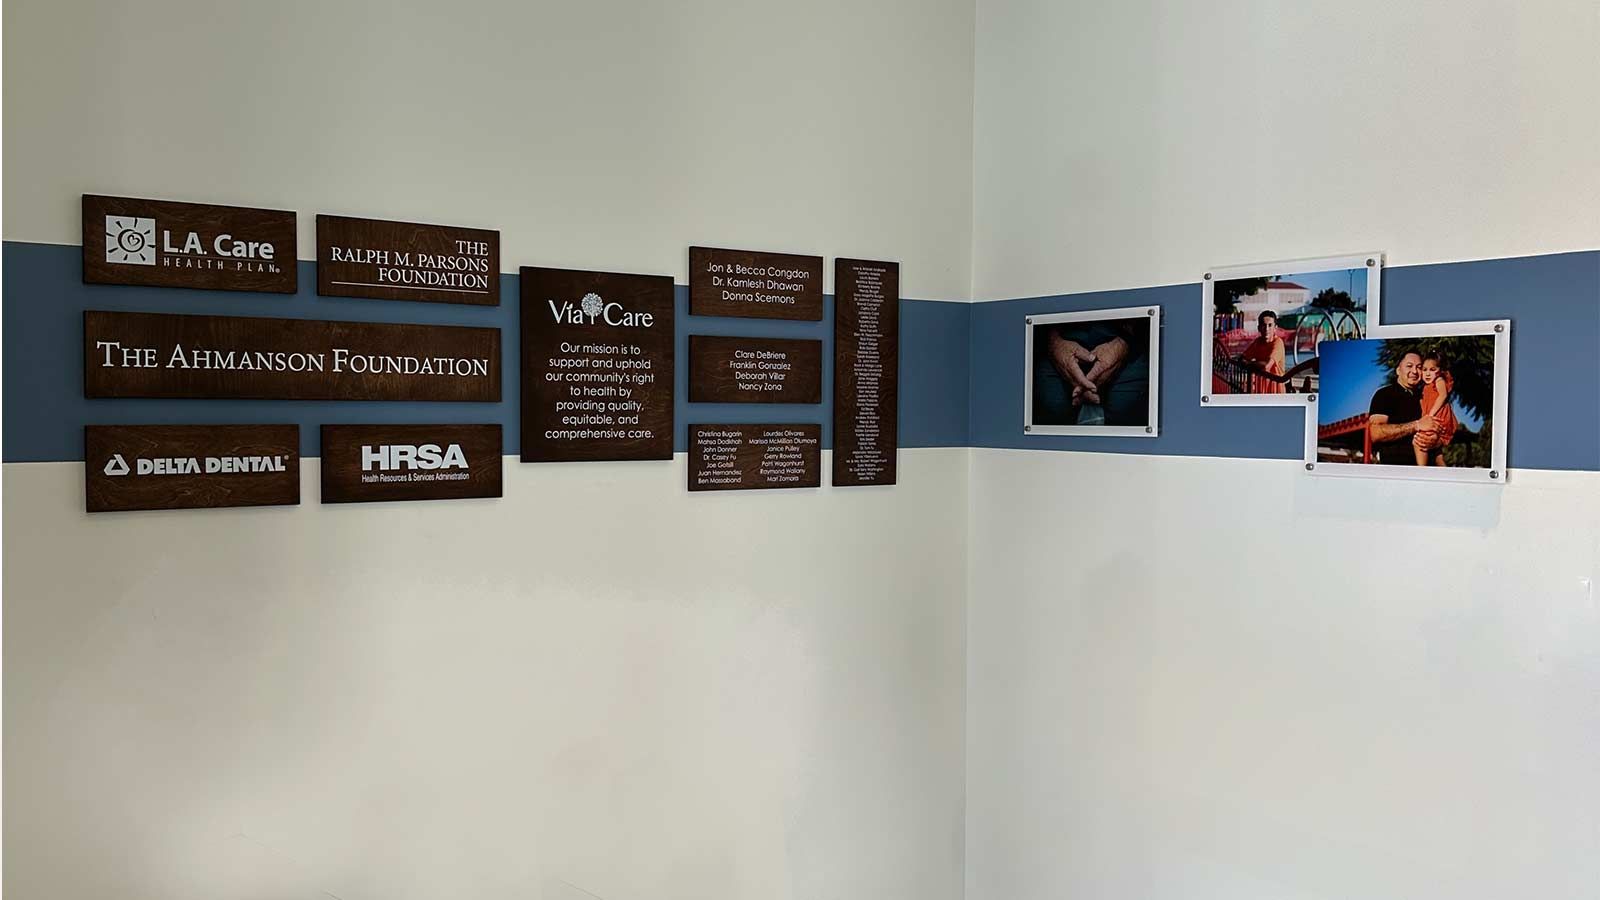 Via Care interior signs attached to the wall